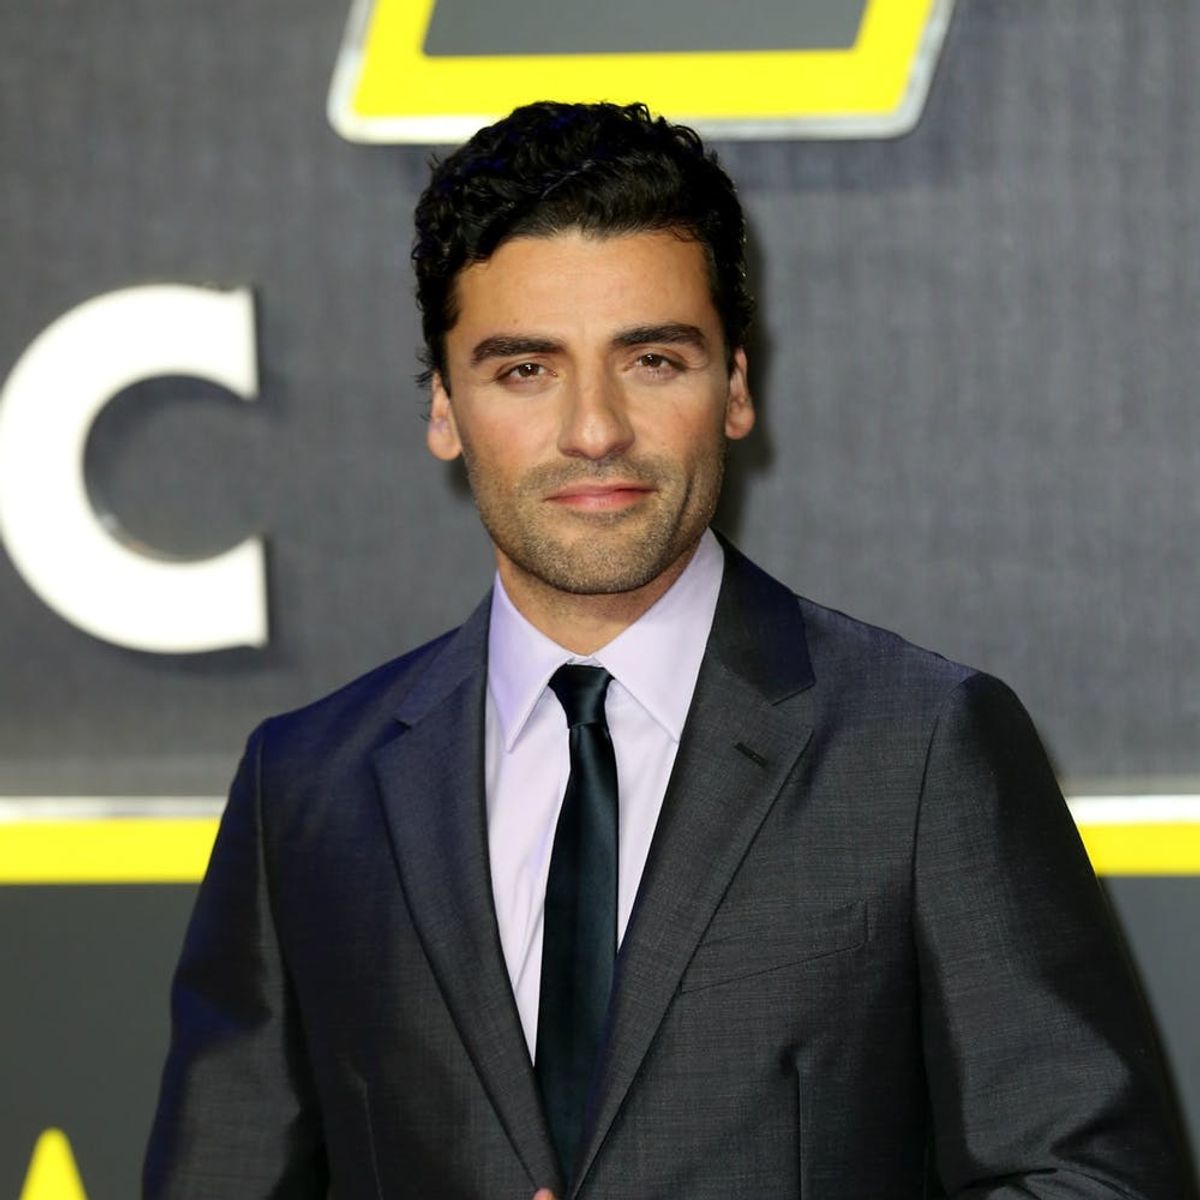 This Is the Heartbreaking Reason Oscar Isaac Hasn’t Been Working the Last Few Months